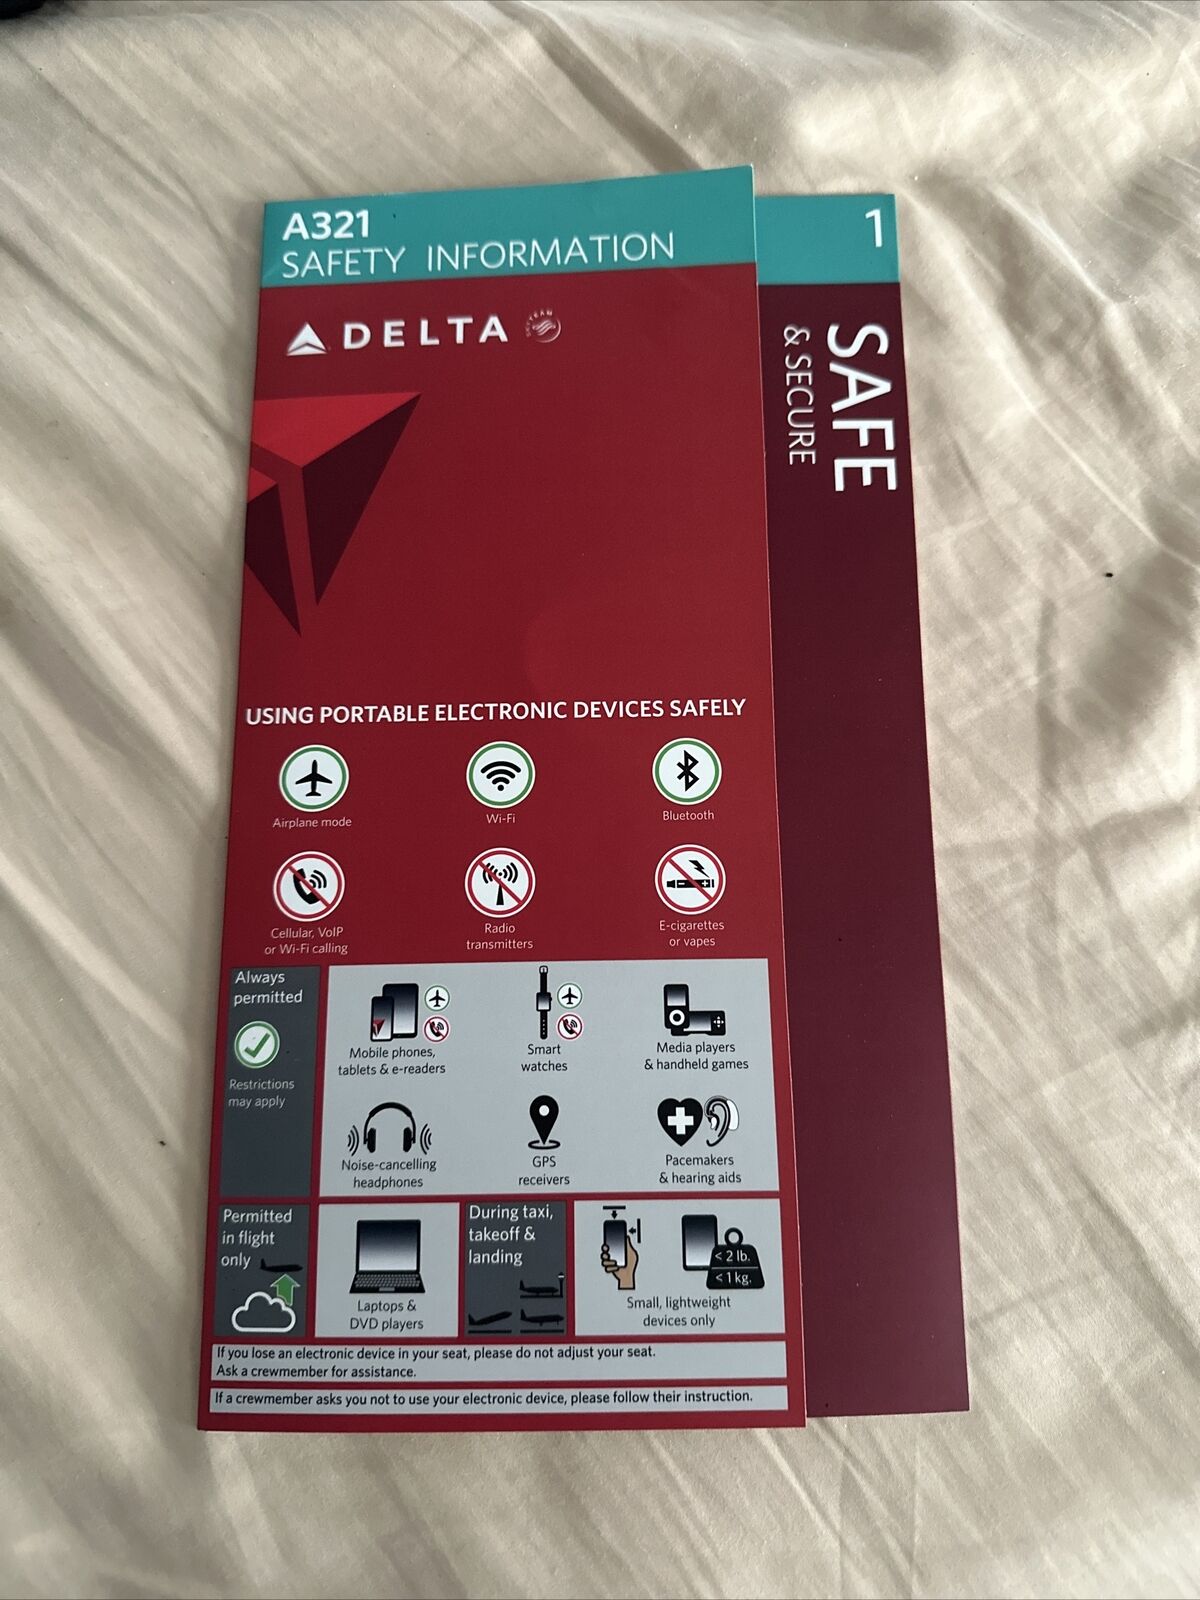 DELTA AIR LINES AIRBUS A321 SAFETY CARD 2020 SAFE & SECURE